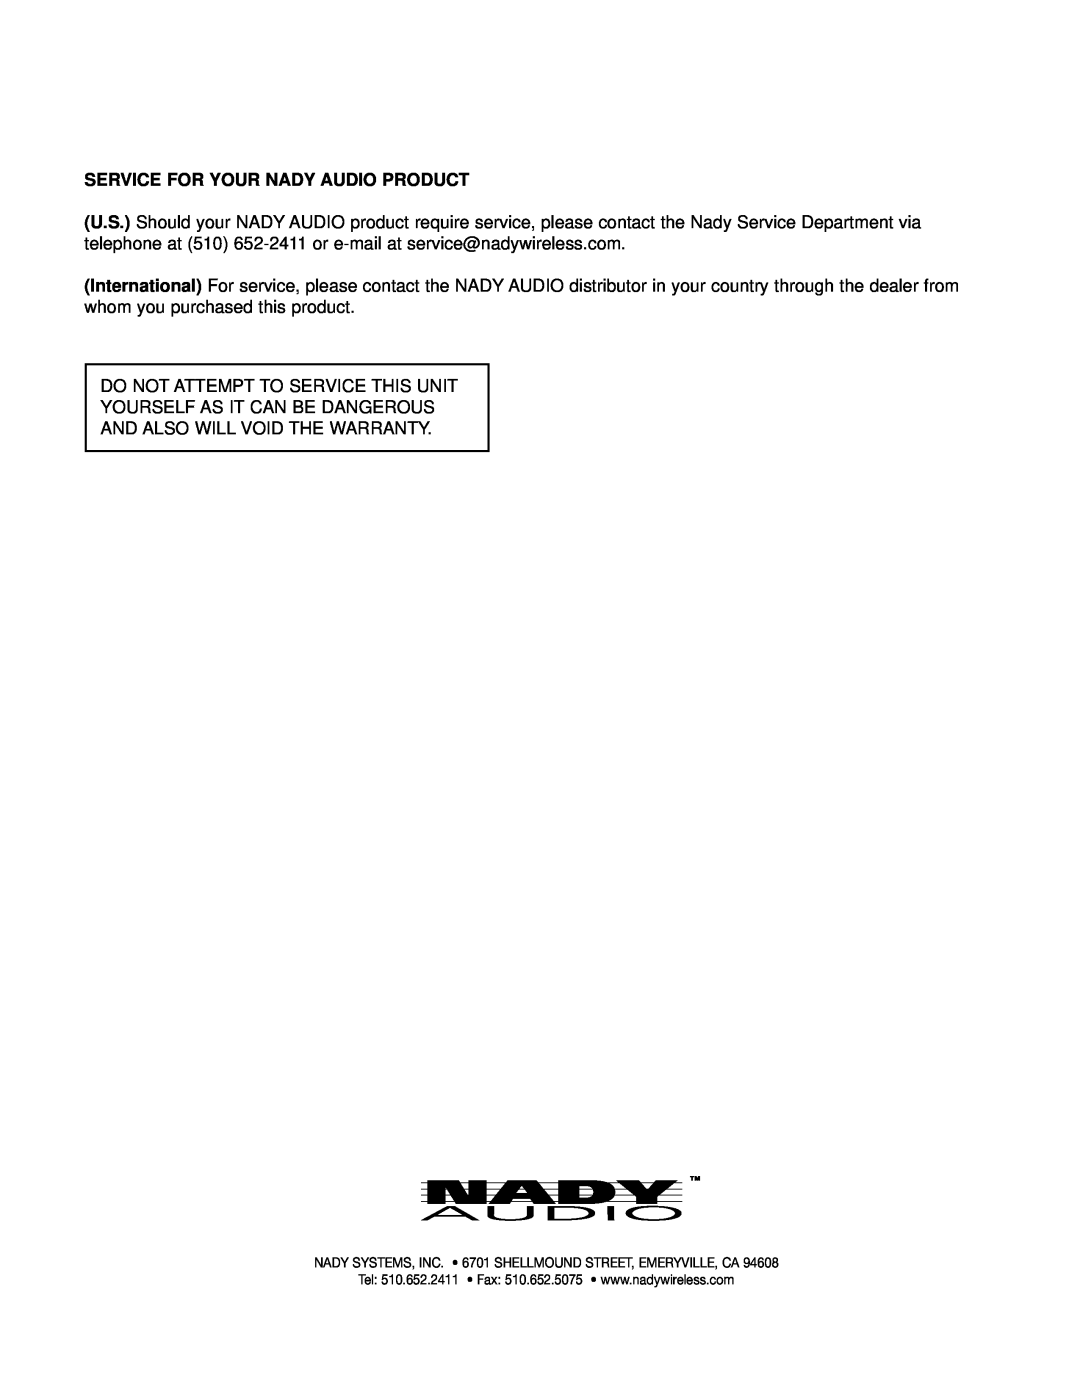 Nady Systems SPM-835 owner manual Service For Your Nady Audio Product 